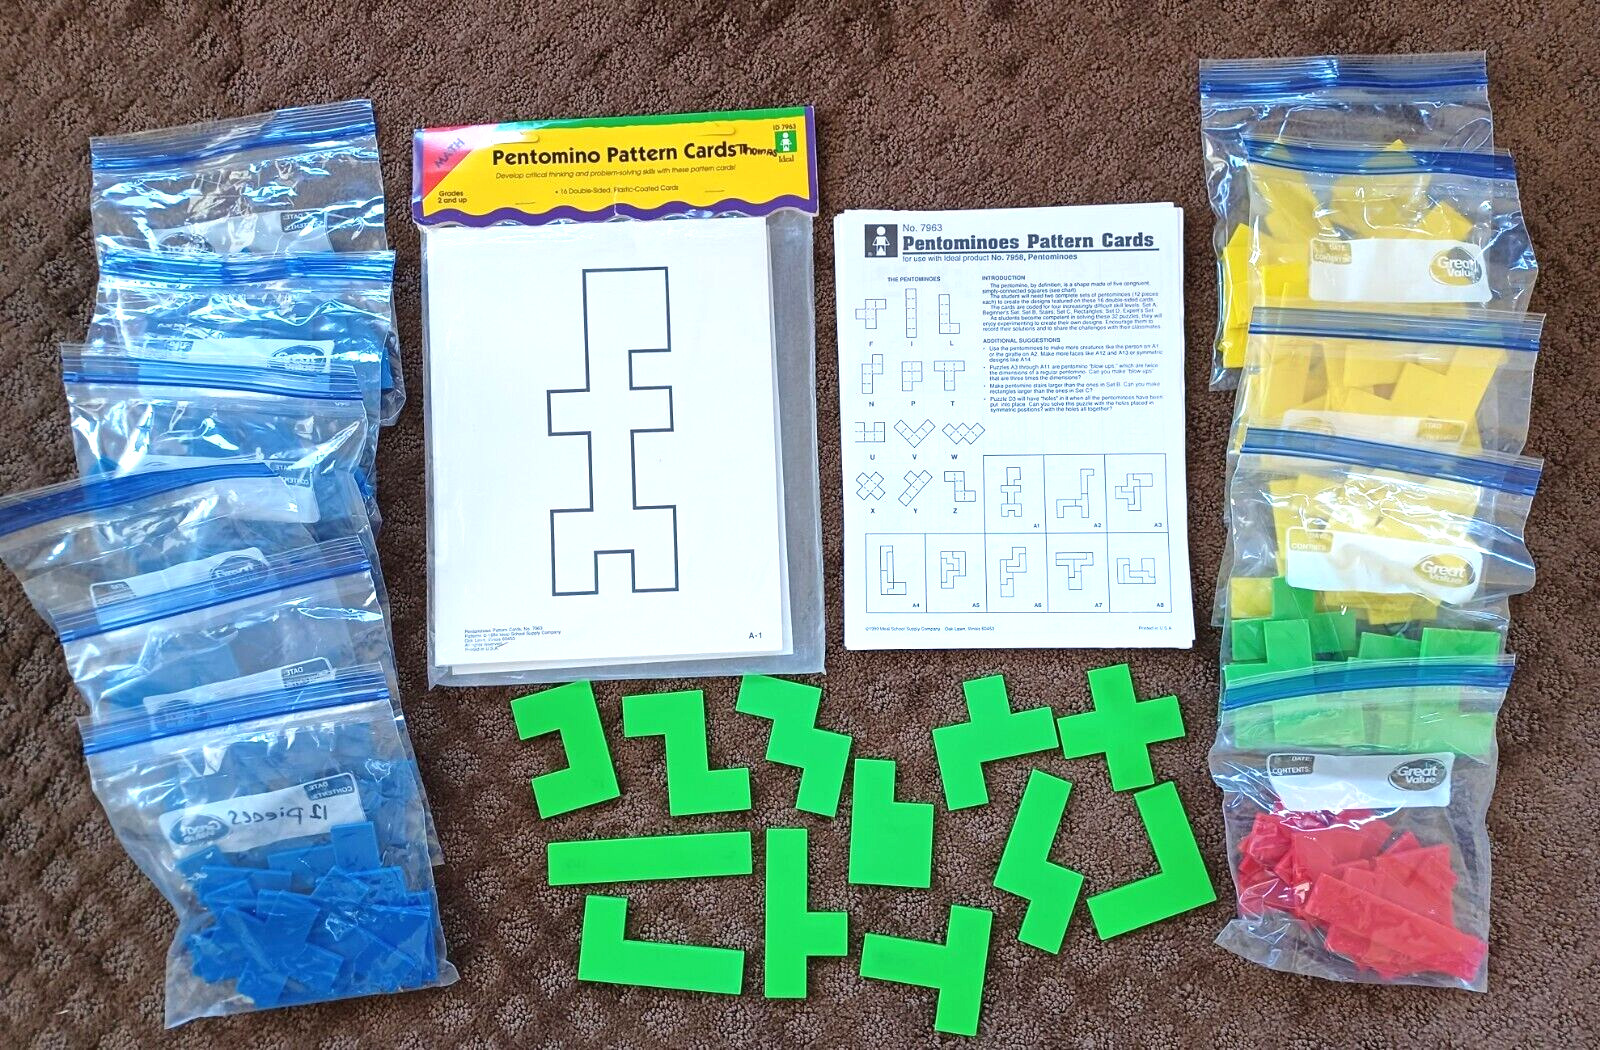 Pentomino Pattern Cards-16 Double-sided, Plastic Coated & 12 sets of Pentominoes